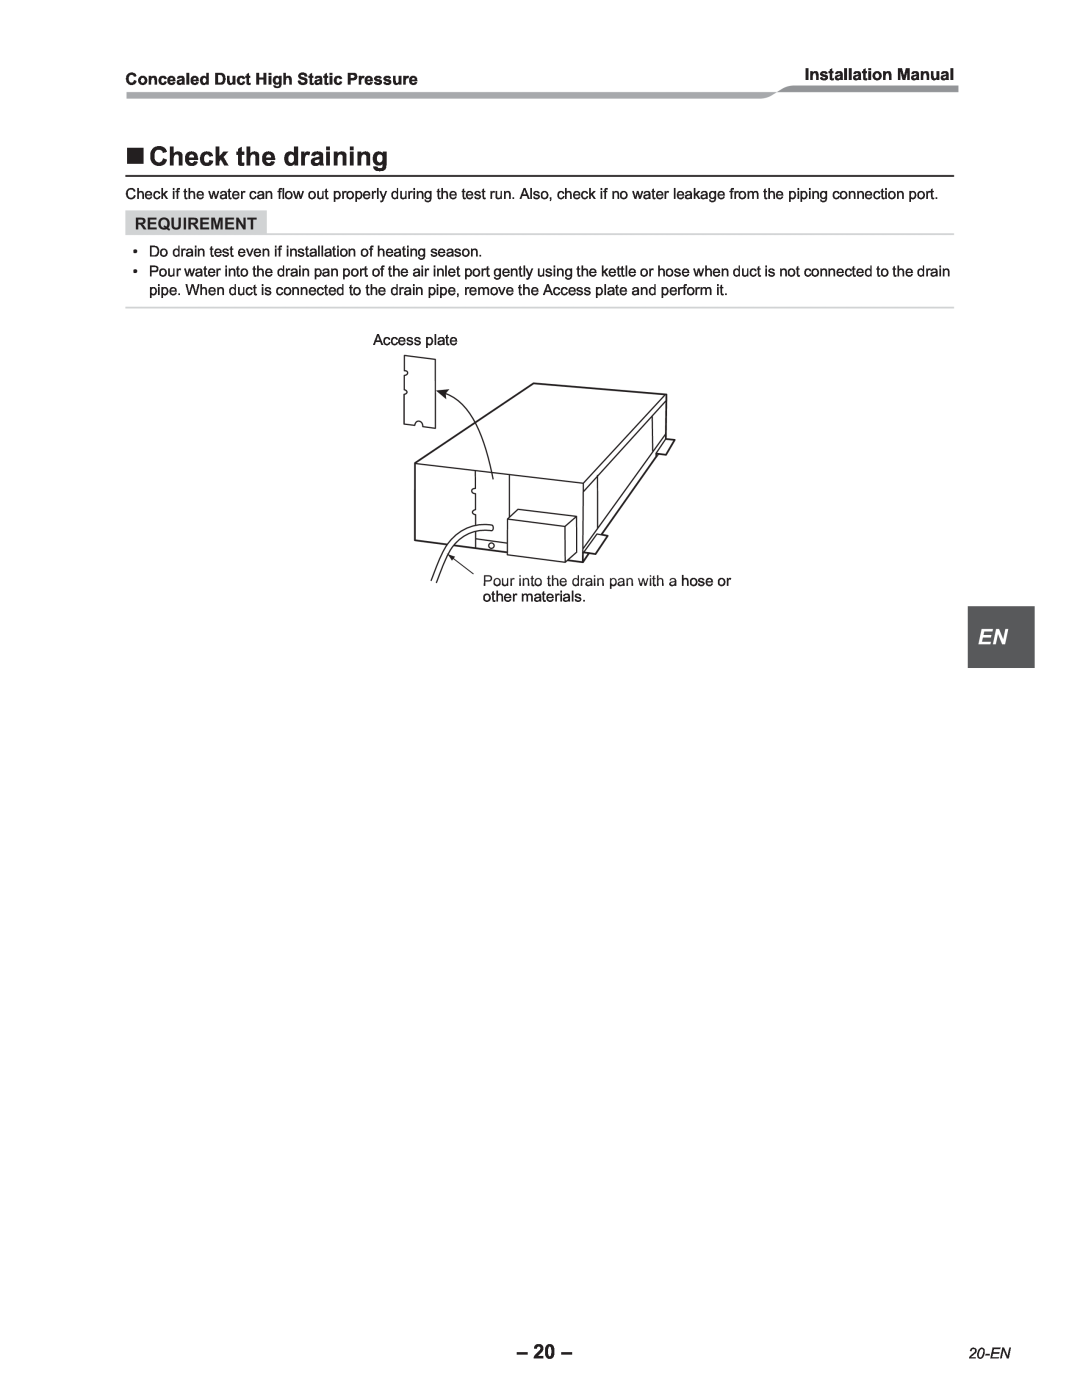 Toshiba RAV-SM2242DT-E Check the draining, Concealed Duct High Static Pressure, Installation Manual, Requirement, 20-EN 